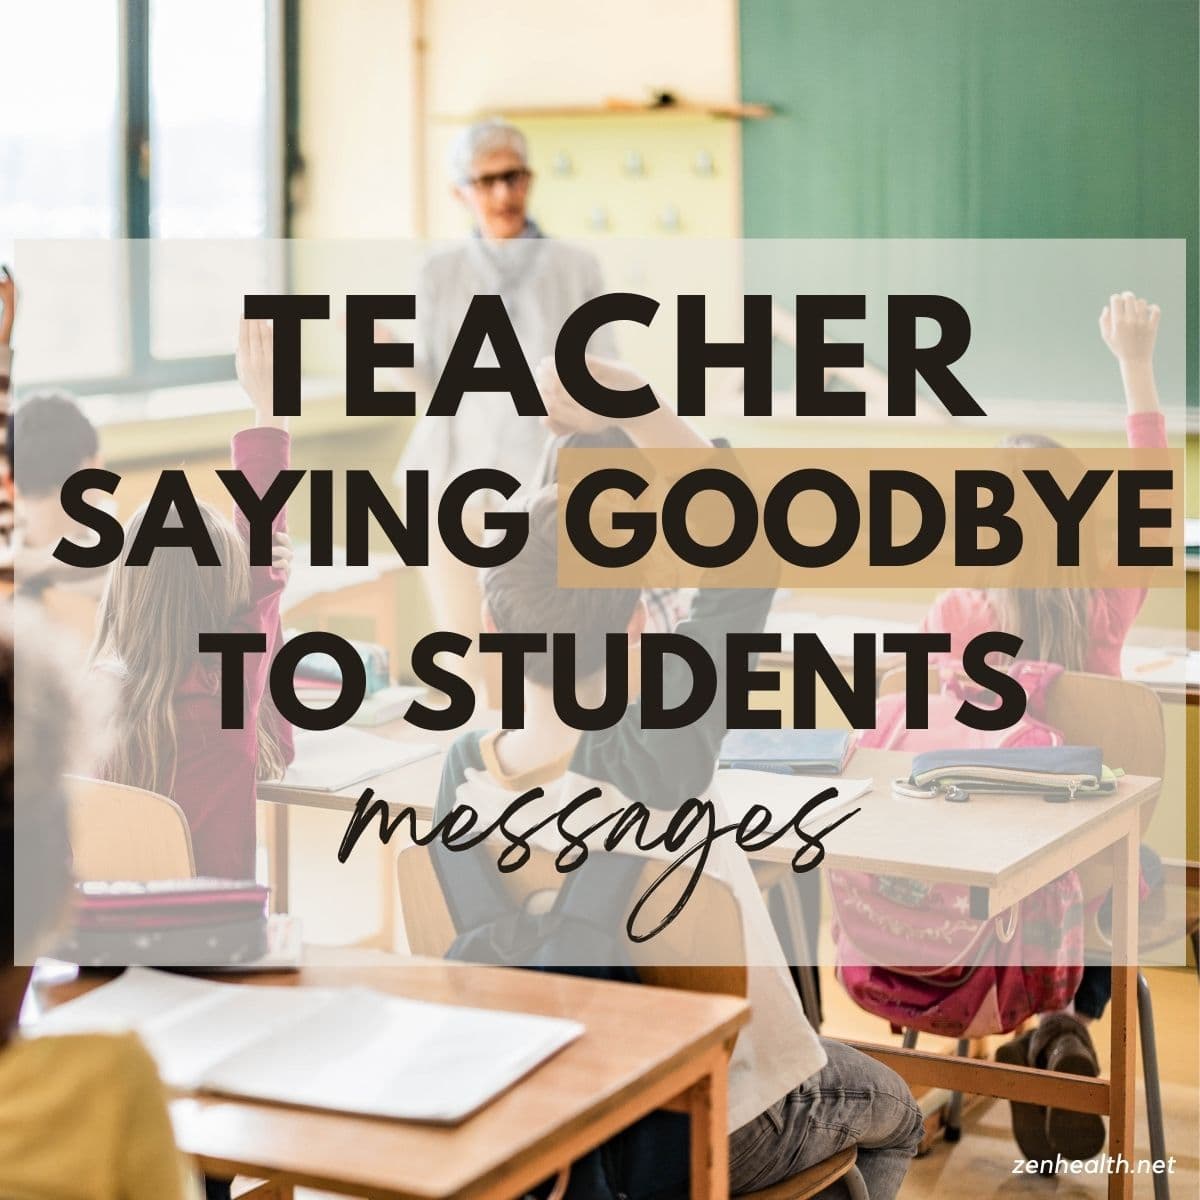 teacher saying goodbye to students messages text overlay on a photo of students raising their hands looking at a teacher in a classroom